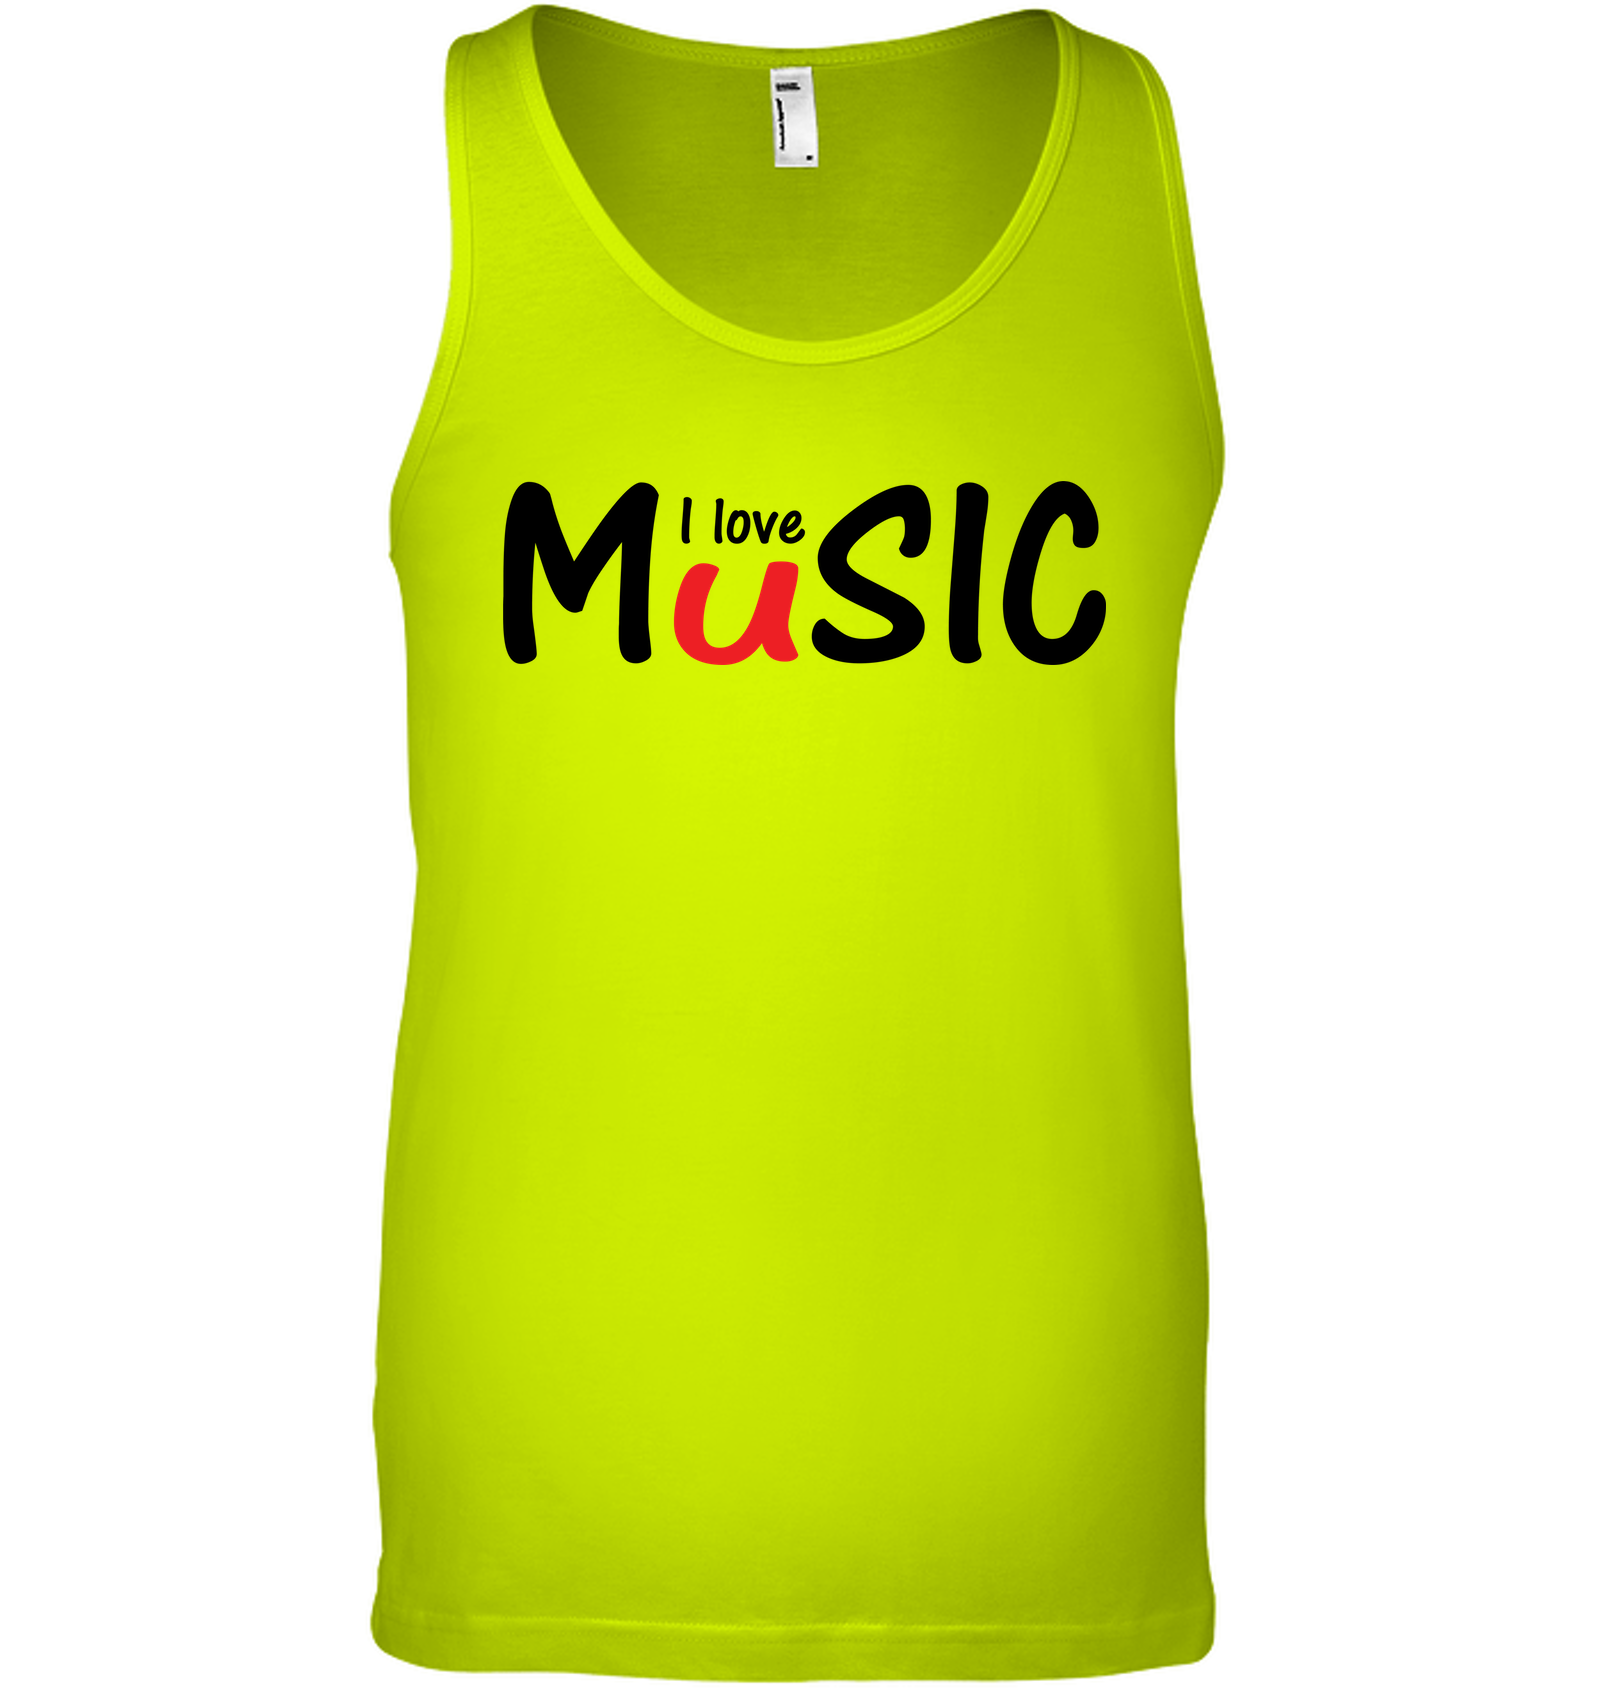 I Love Music plain and simple - Bella + Canvas Unisex Jersey Tank